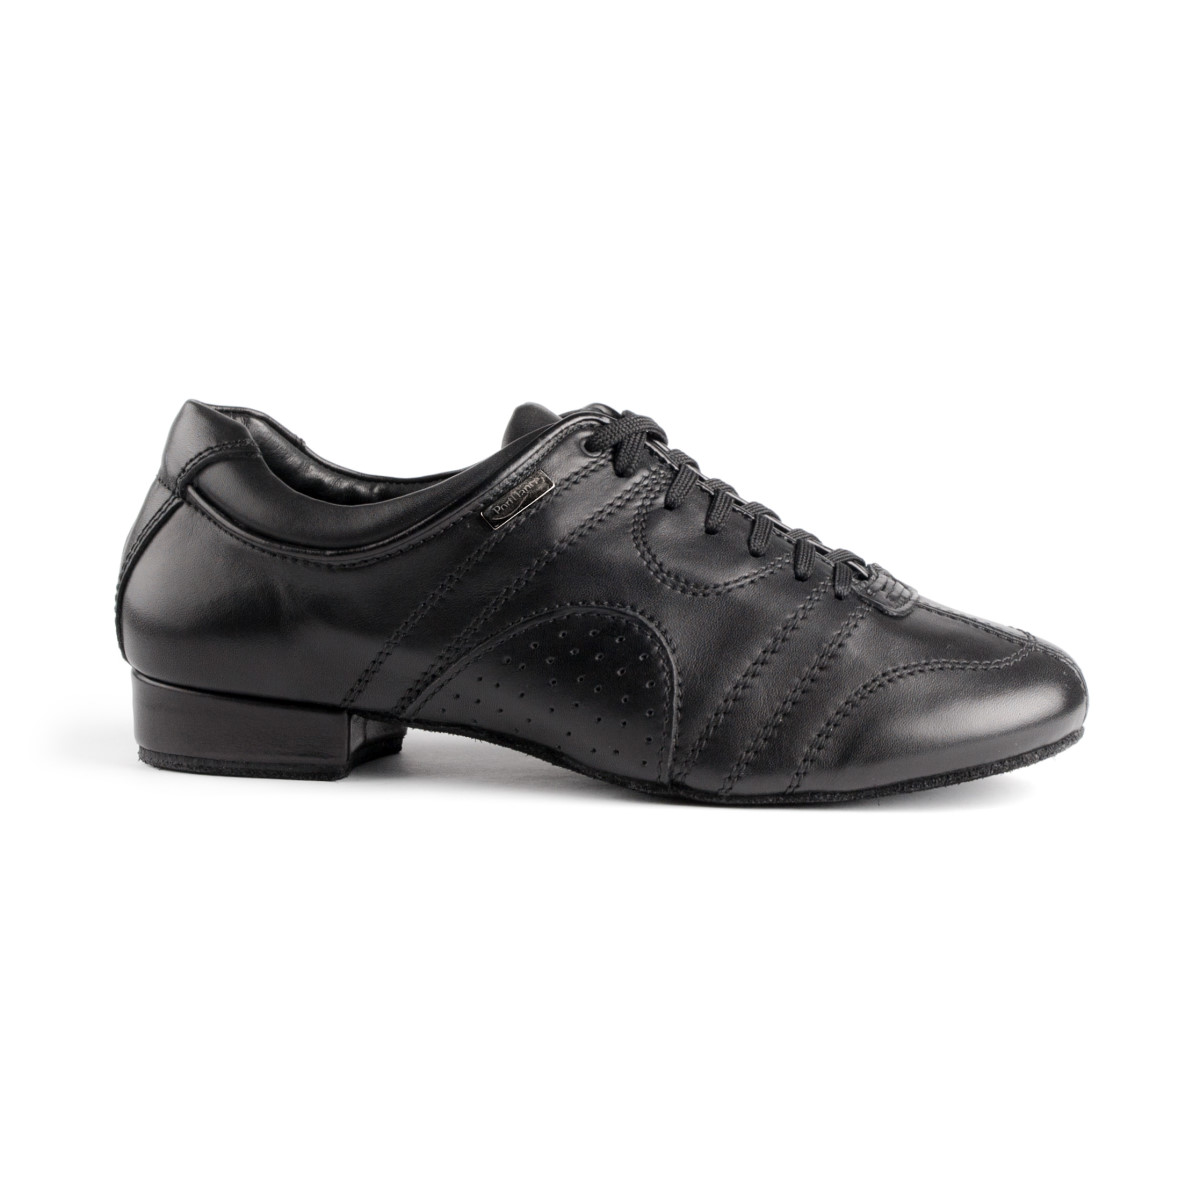 Tableta mayor Inmuebles PortDance - Mens Dance Shoes PD Casual - Leather Black